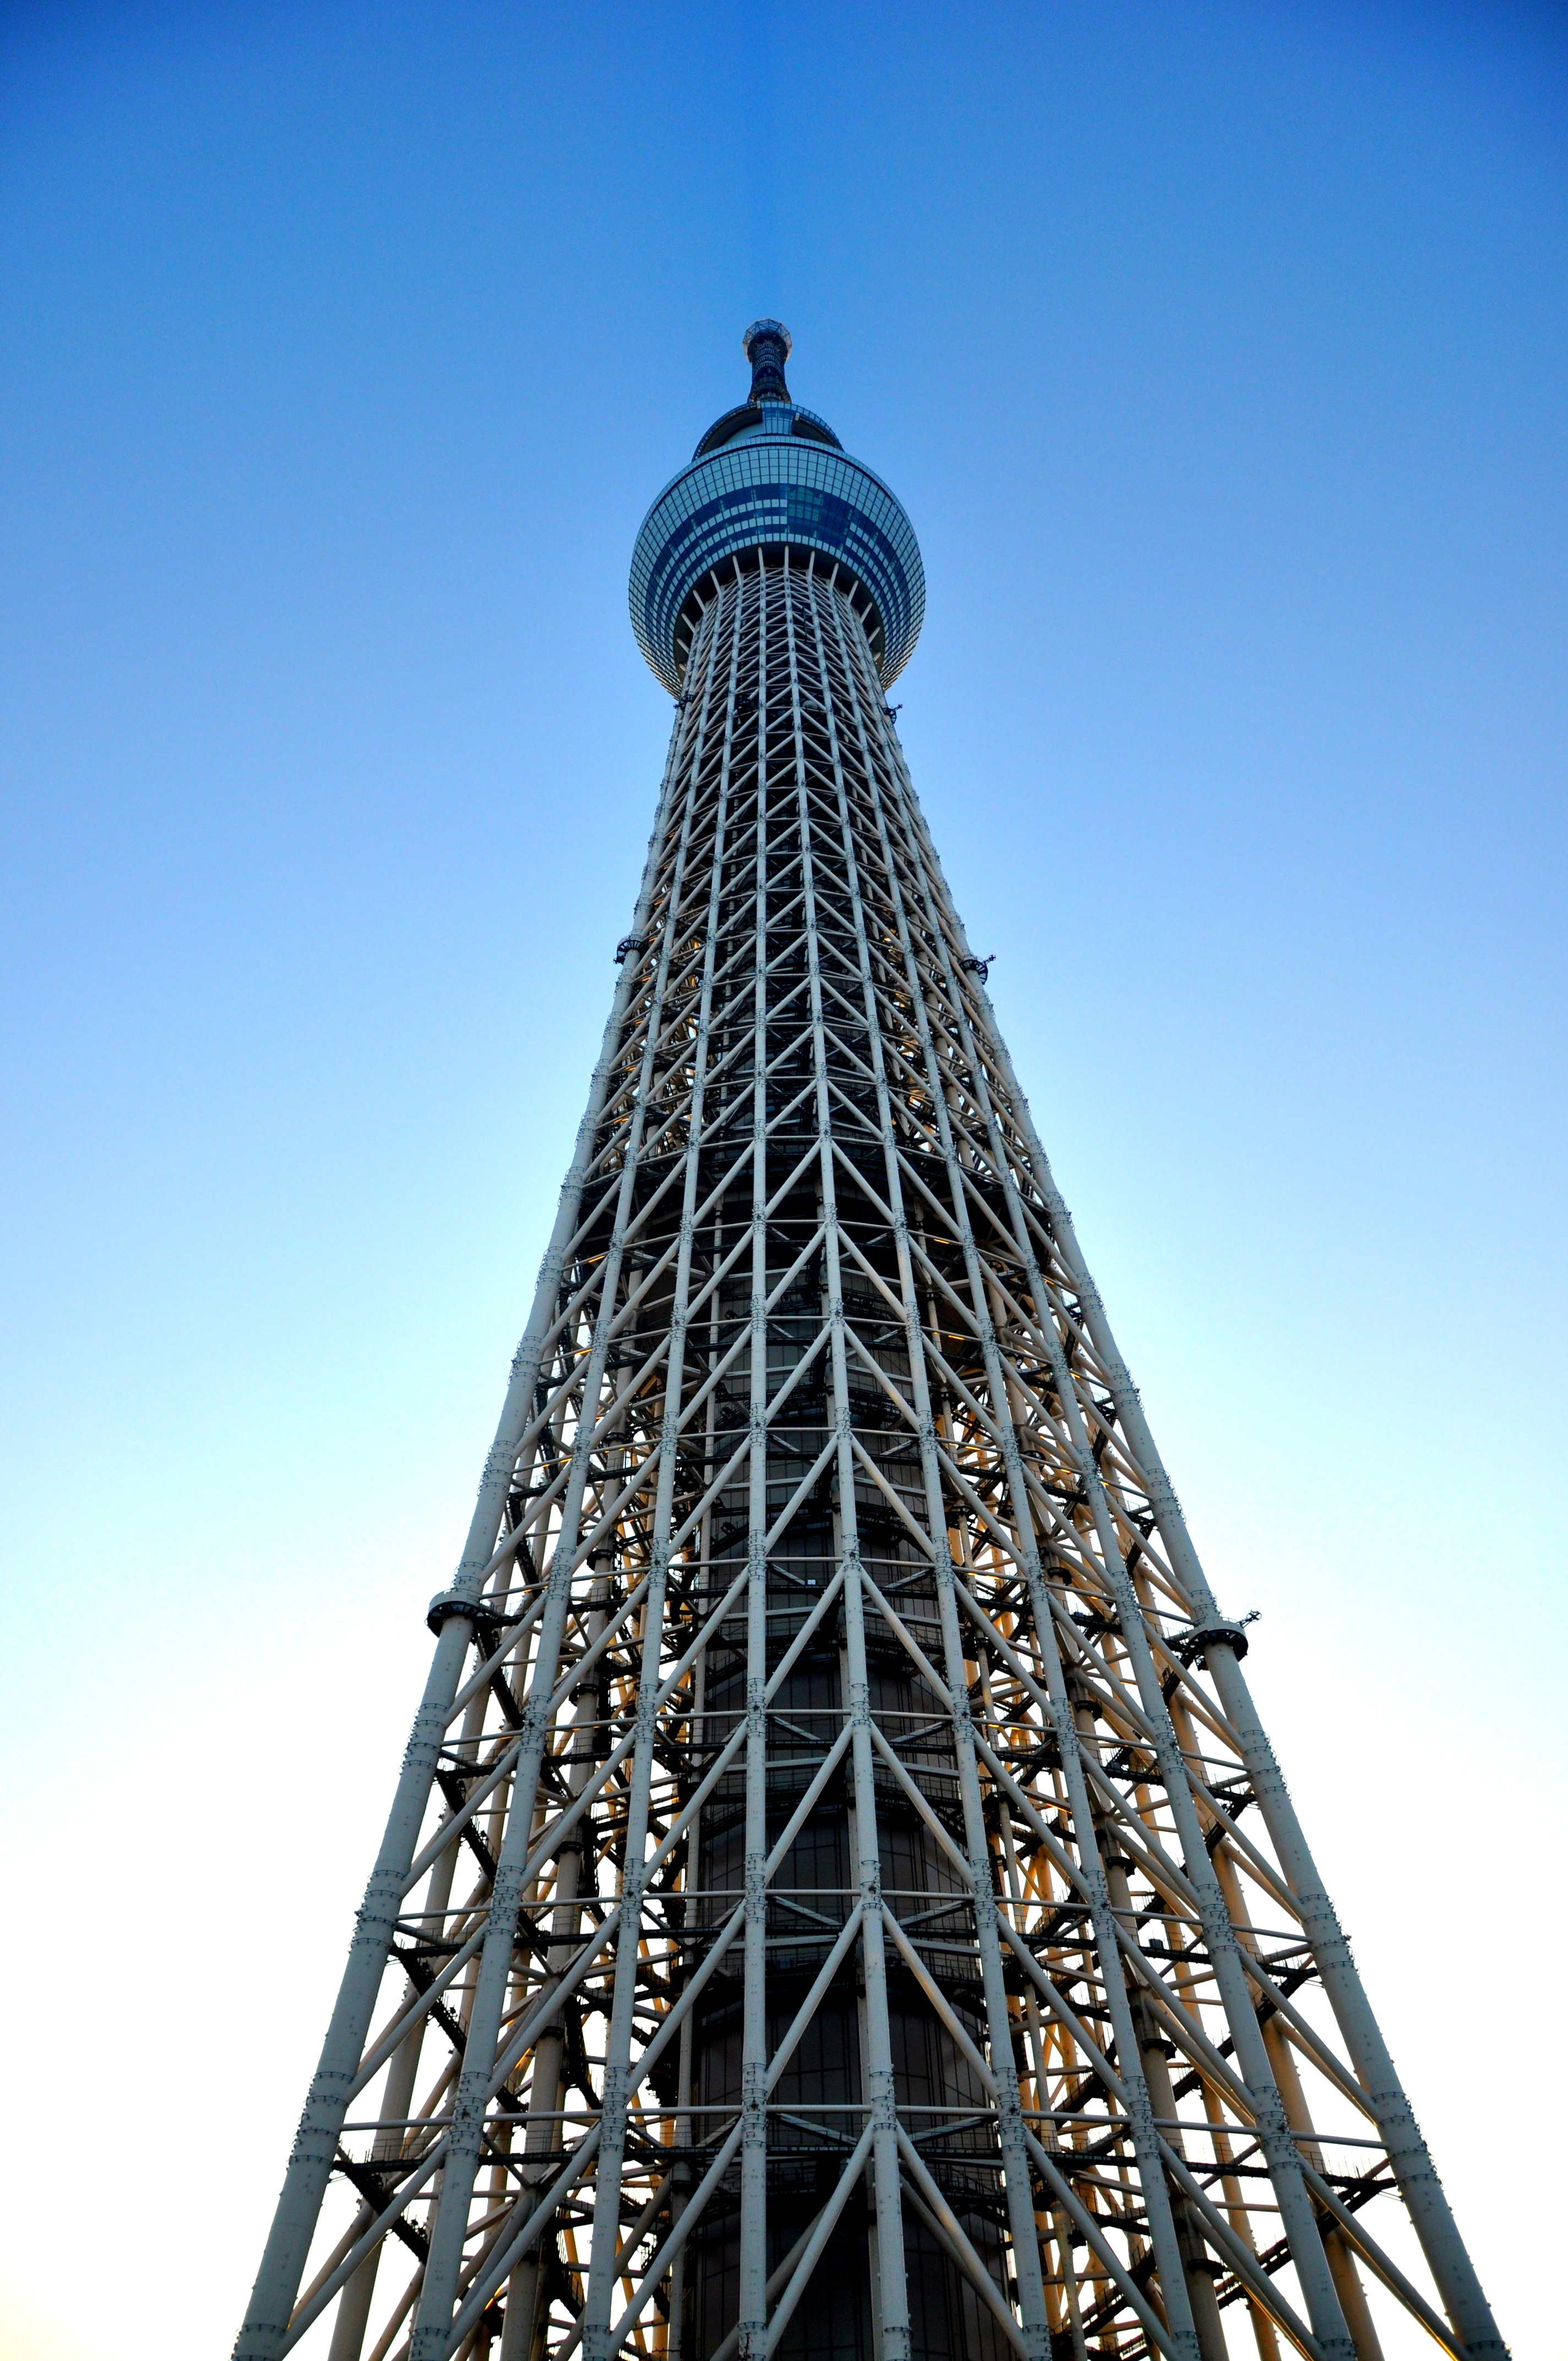 Tokyo Skytree in Japan image - Free stock photo - Public Domain photo - CC0 Images